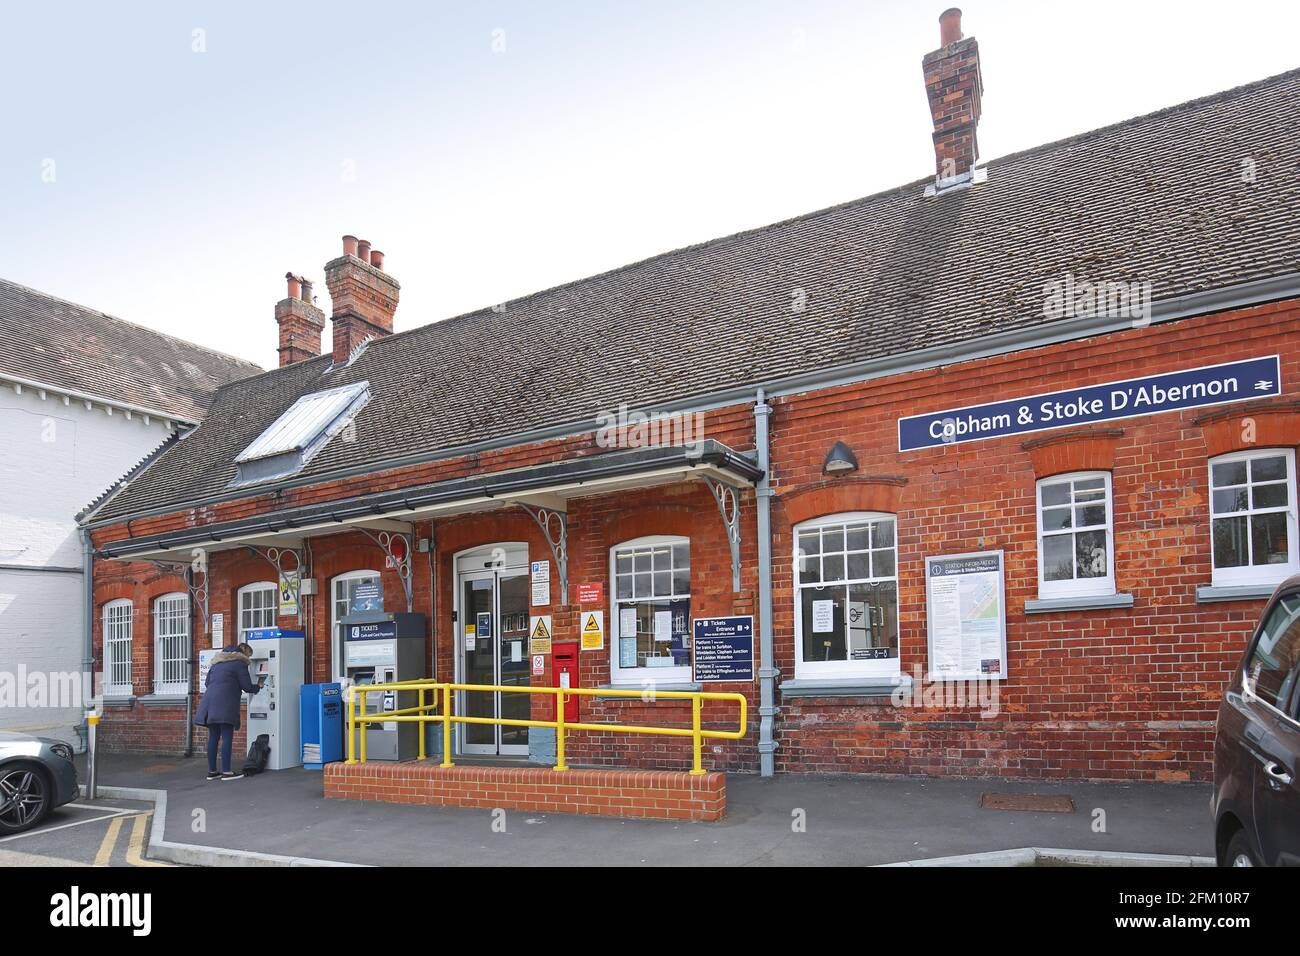 Entrance to Cobham and Stoke D'Abernon Station, Surrey. Typical Victorian station in the suburbs of London, UK. Shows passenger using ticket machine. Stock Photo